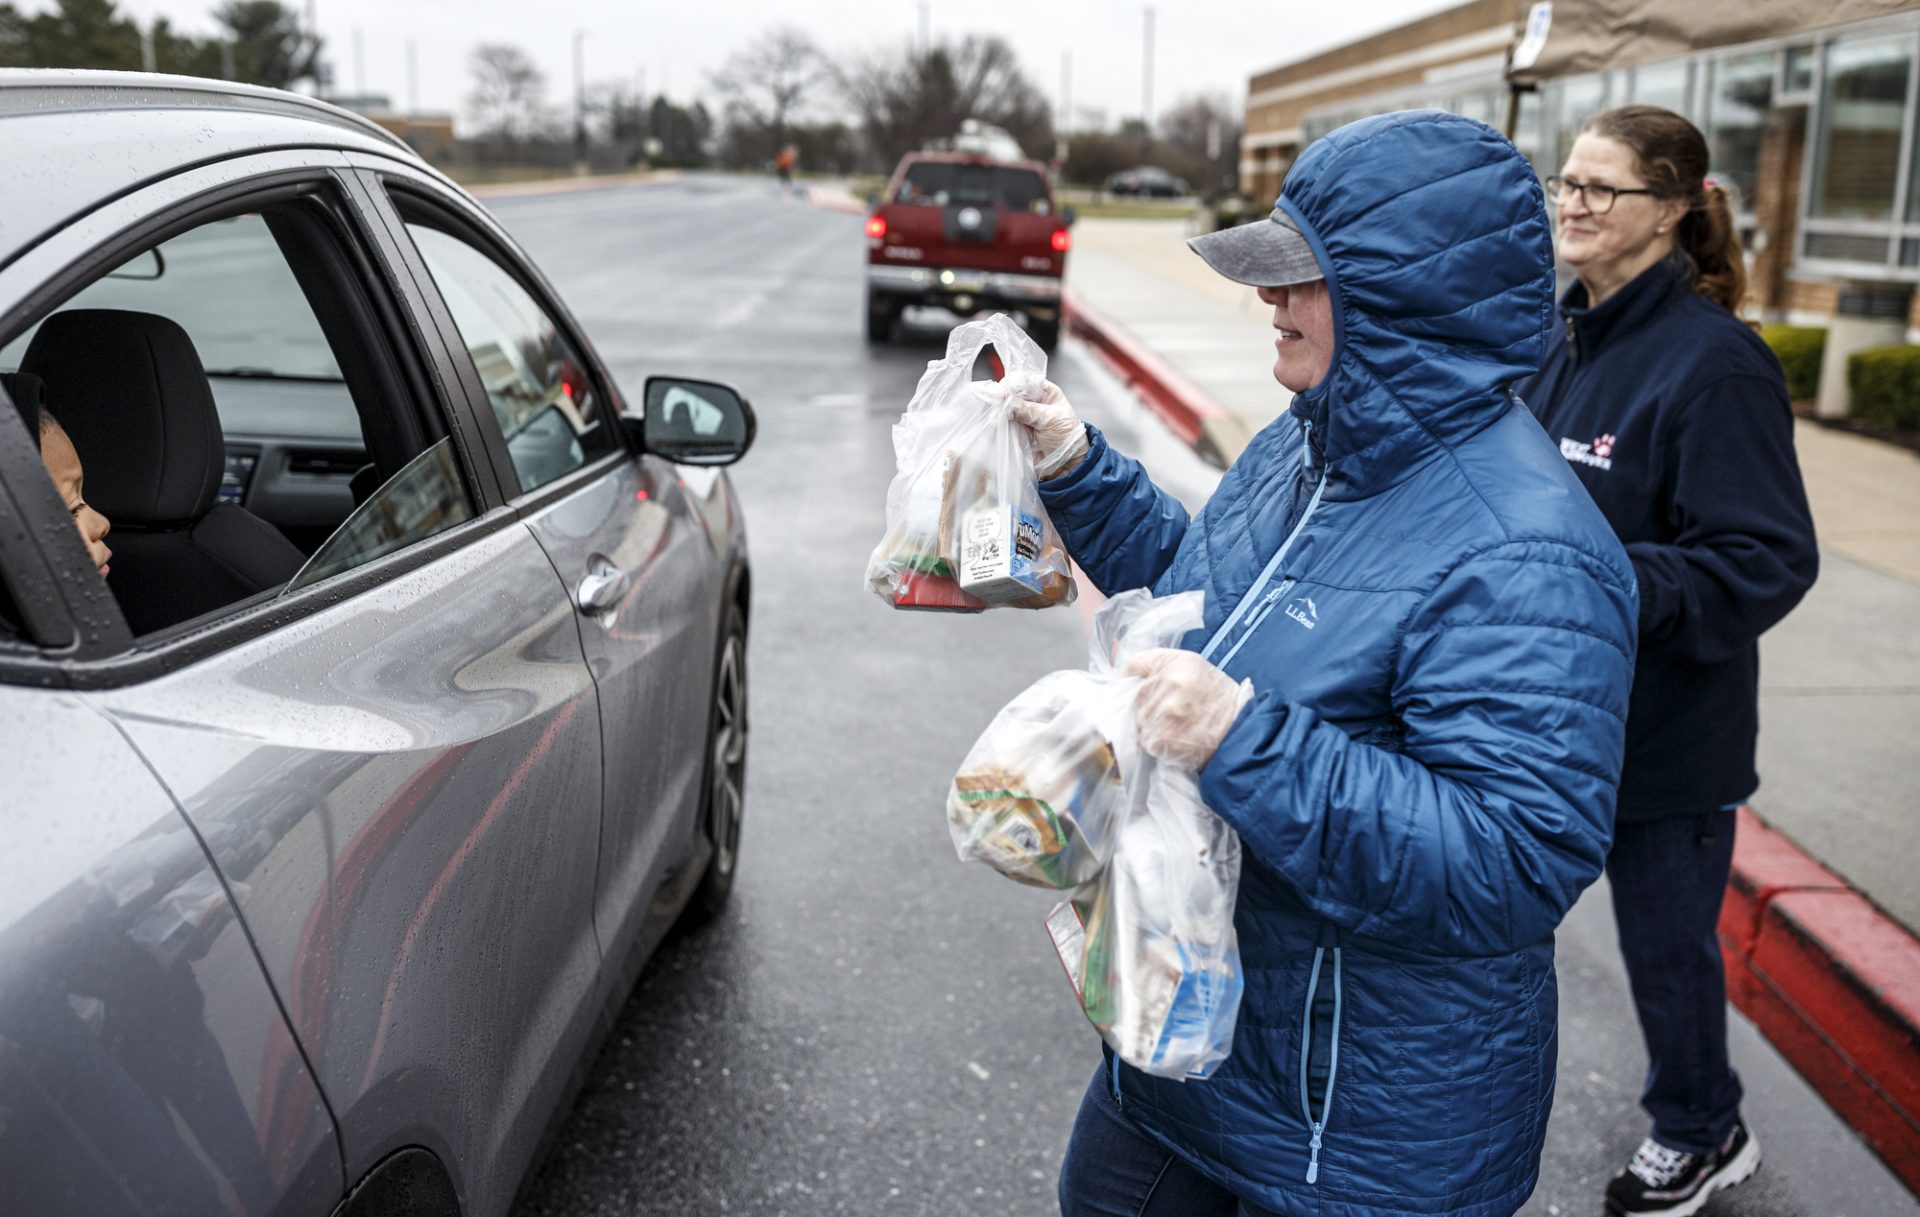 Kim Farris, left, and Cynthia Euler deliver meals to a family at Central Dauphin East High School. During the coronavirus COVID-19 shutdown, drive-through distribution of breakfast and lunch will be available each weekday from 8:30 a.m. through 11:00 a.m. at Central Dauphin East High School and Swatara Middle School. This first-come, first-served program is for all resident children in the district ages 18 and under, March 17, 2020.